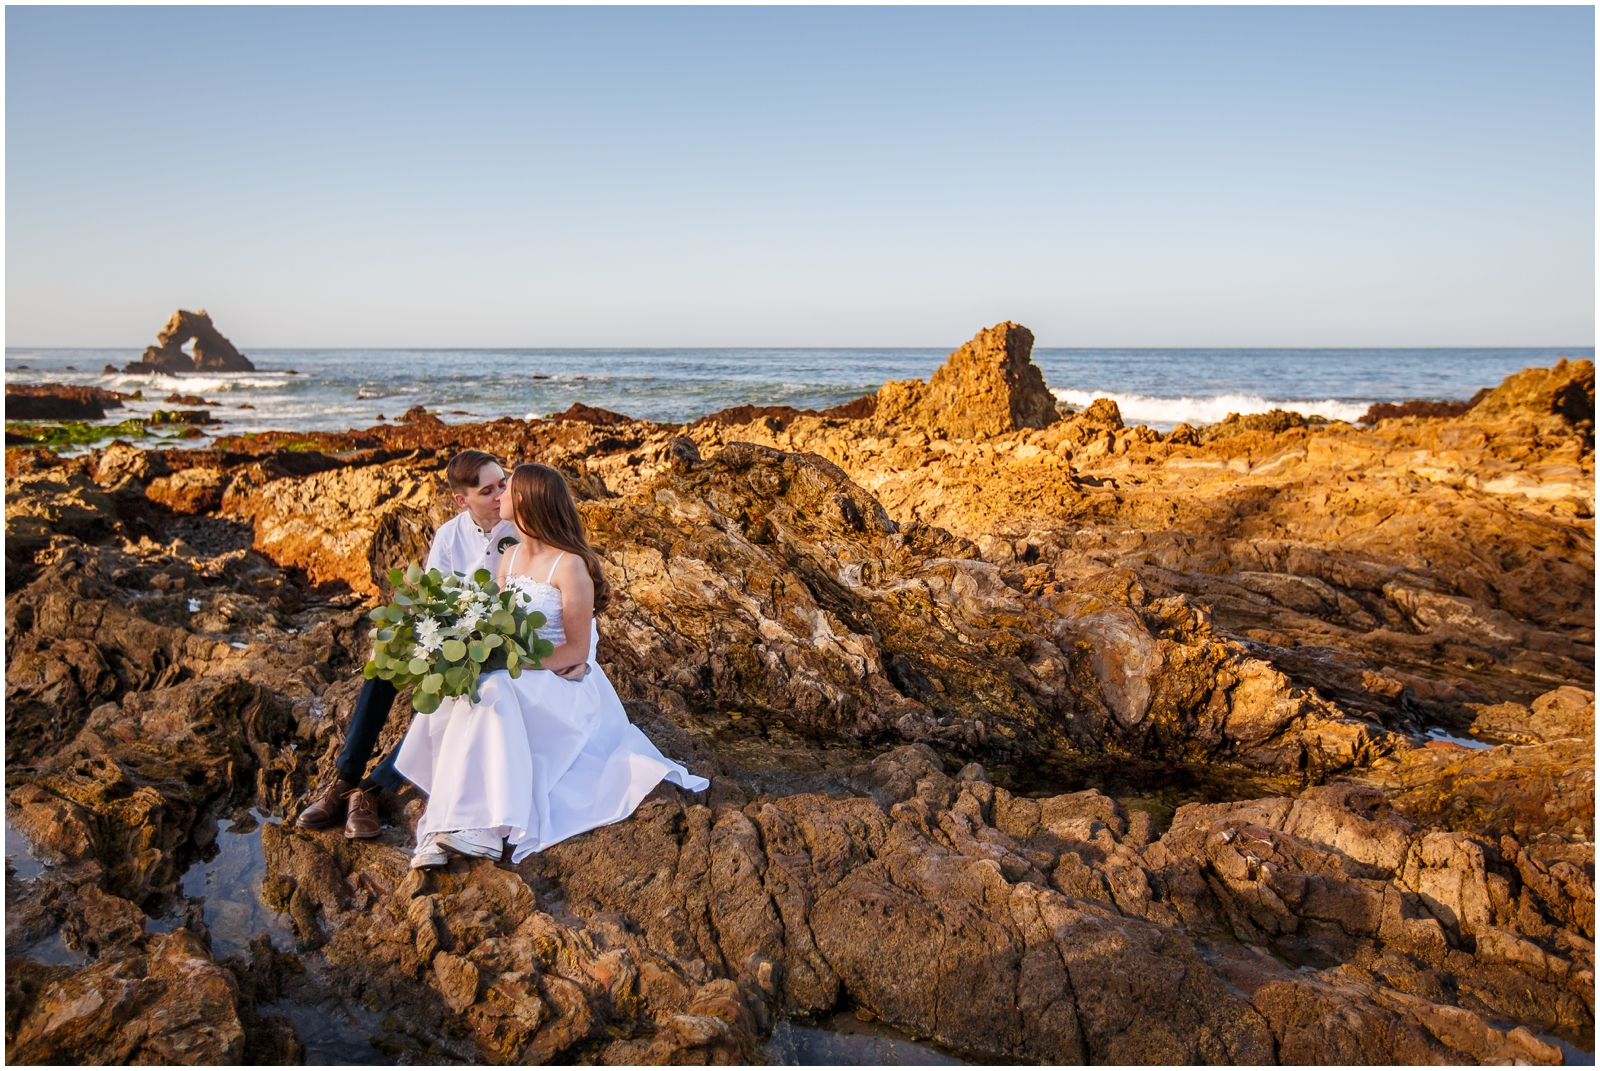 This couple explored the tidepools at Corona Del Mar on their wedding day.